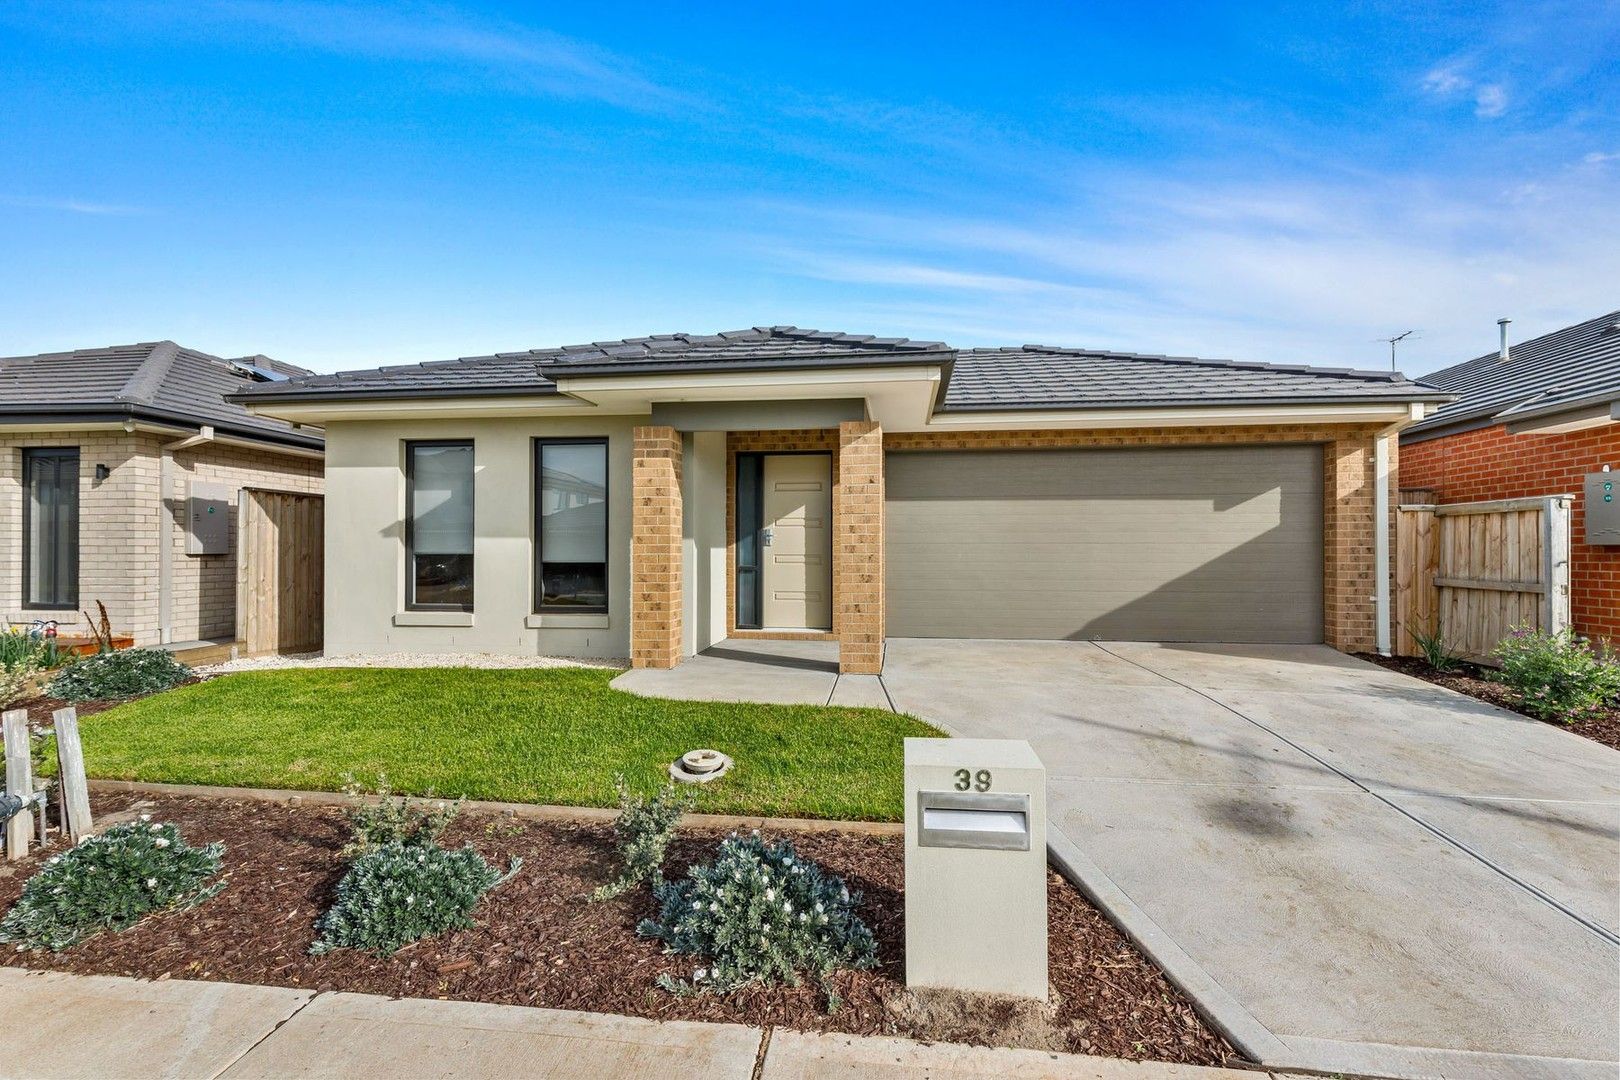 4 bedrooms House in 39 Ellimatta Road MAMBOURIN VIC, 3024